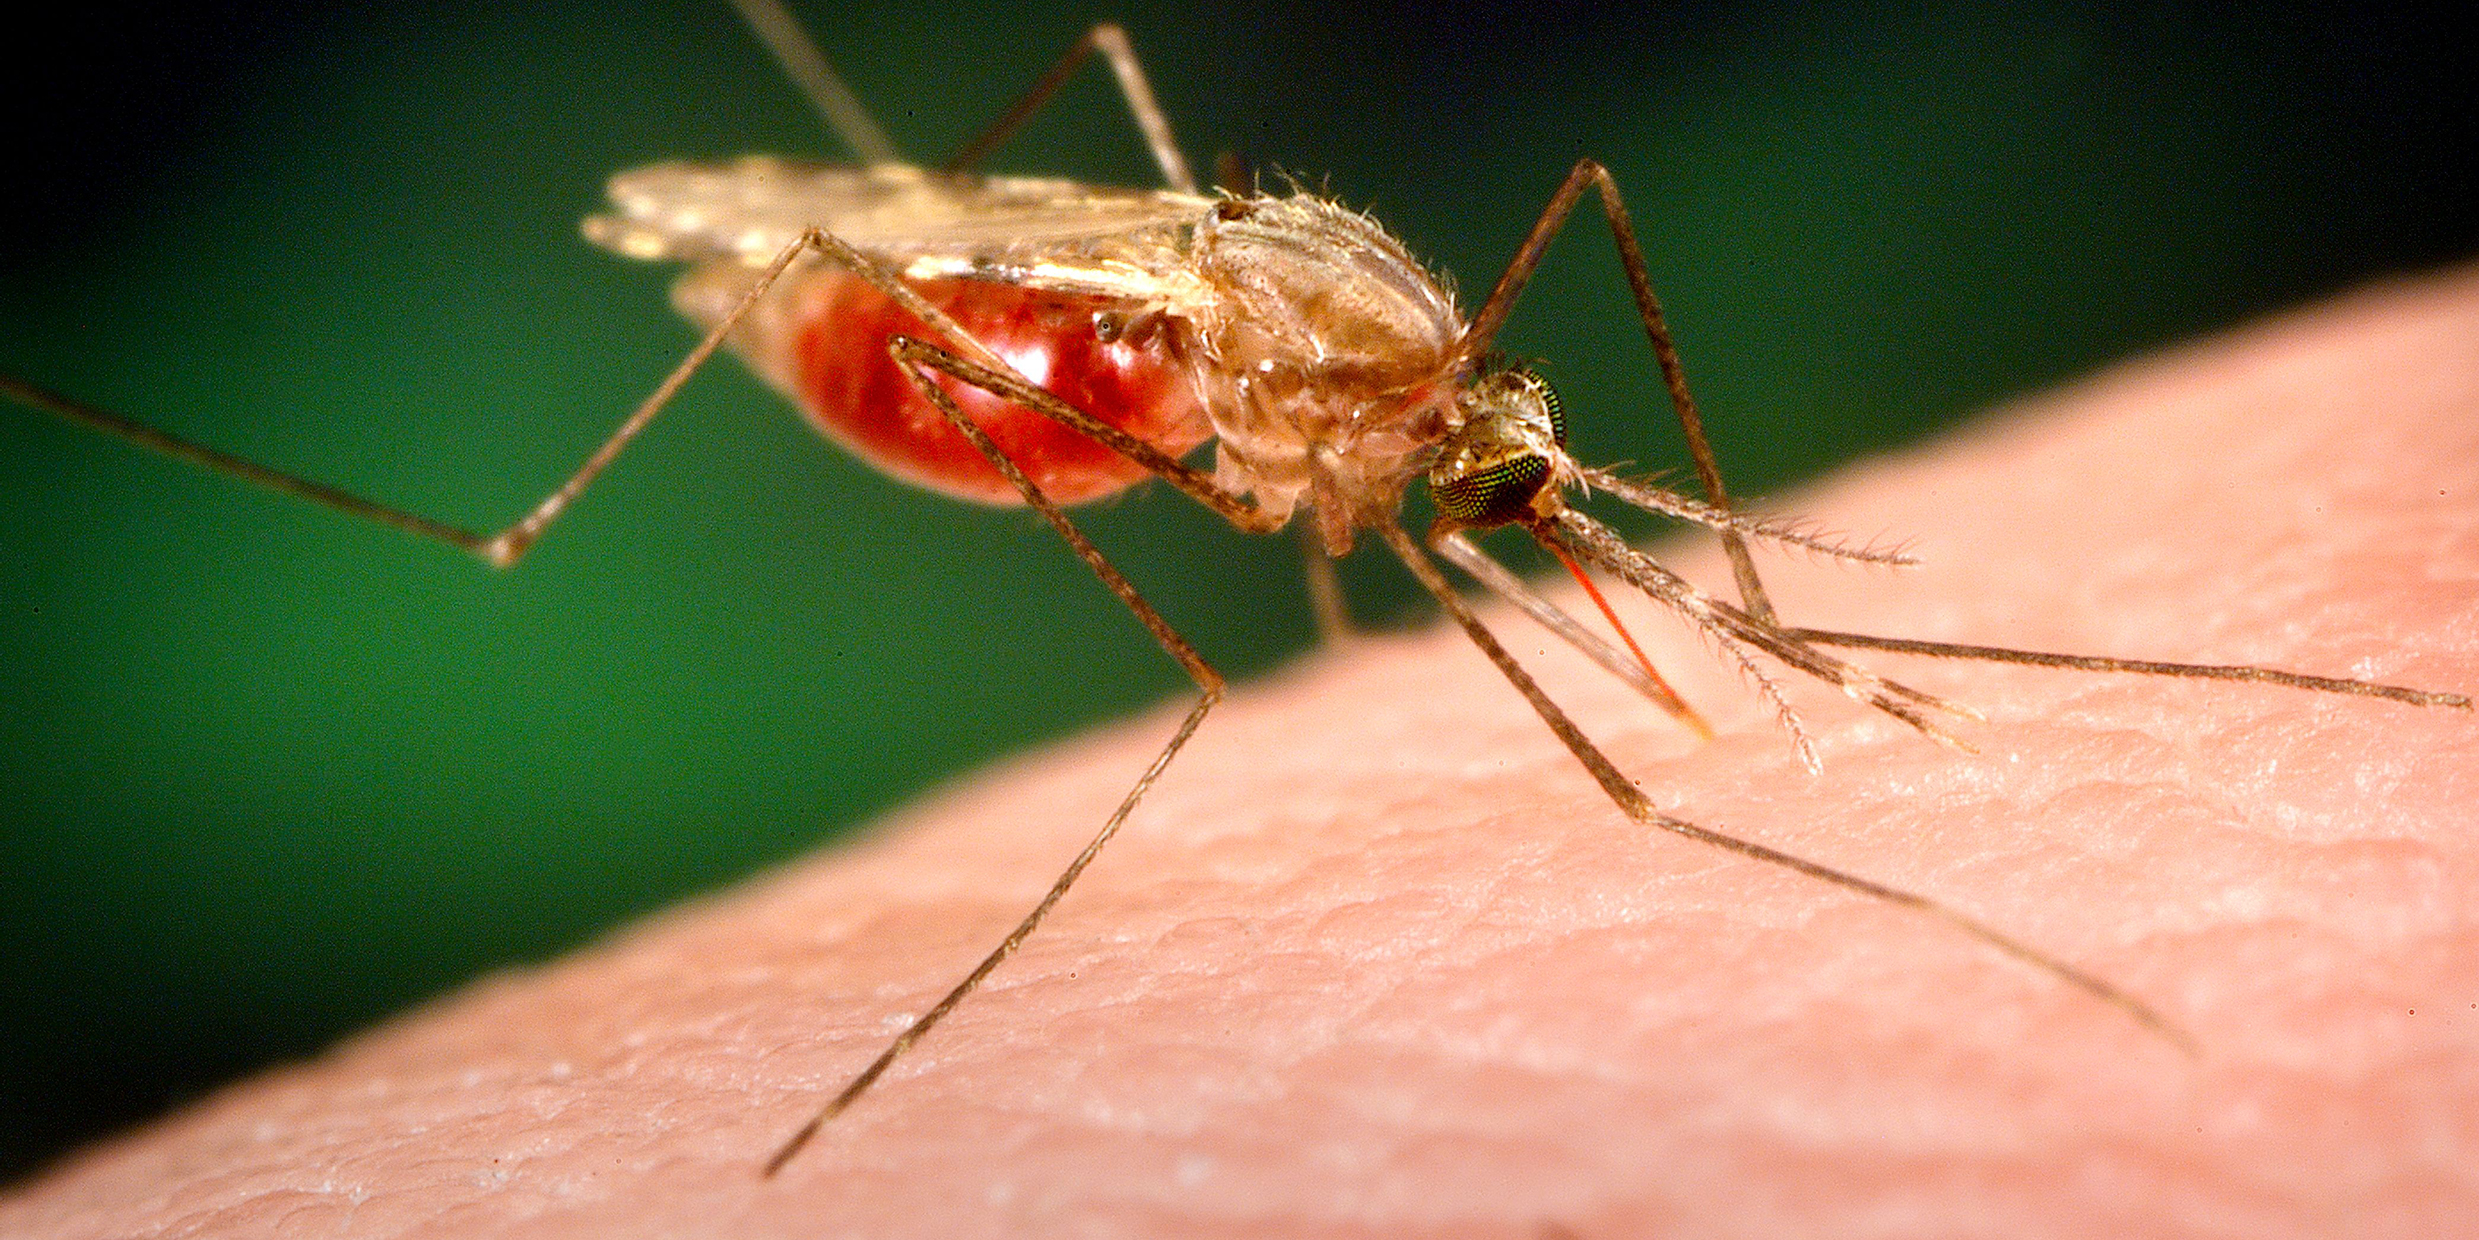 Close-up image of a mosquito feeding on a human